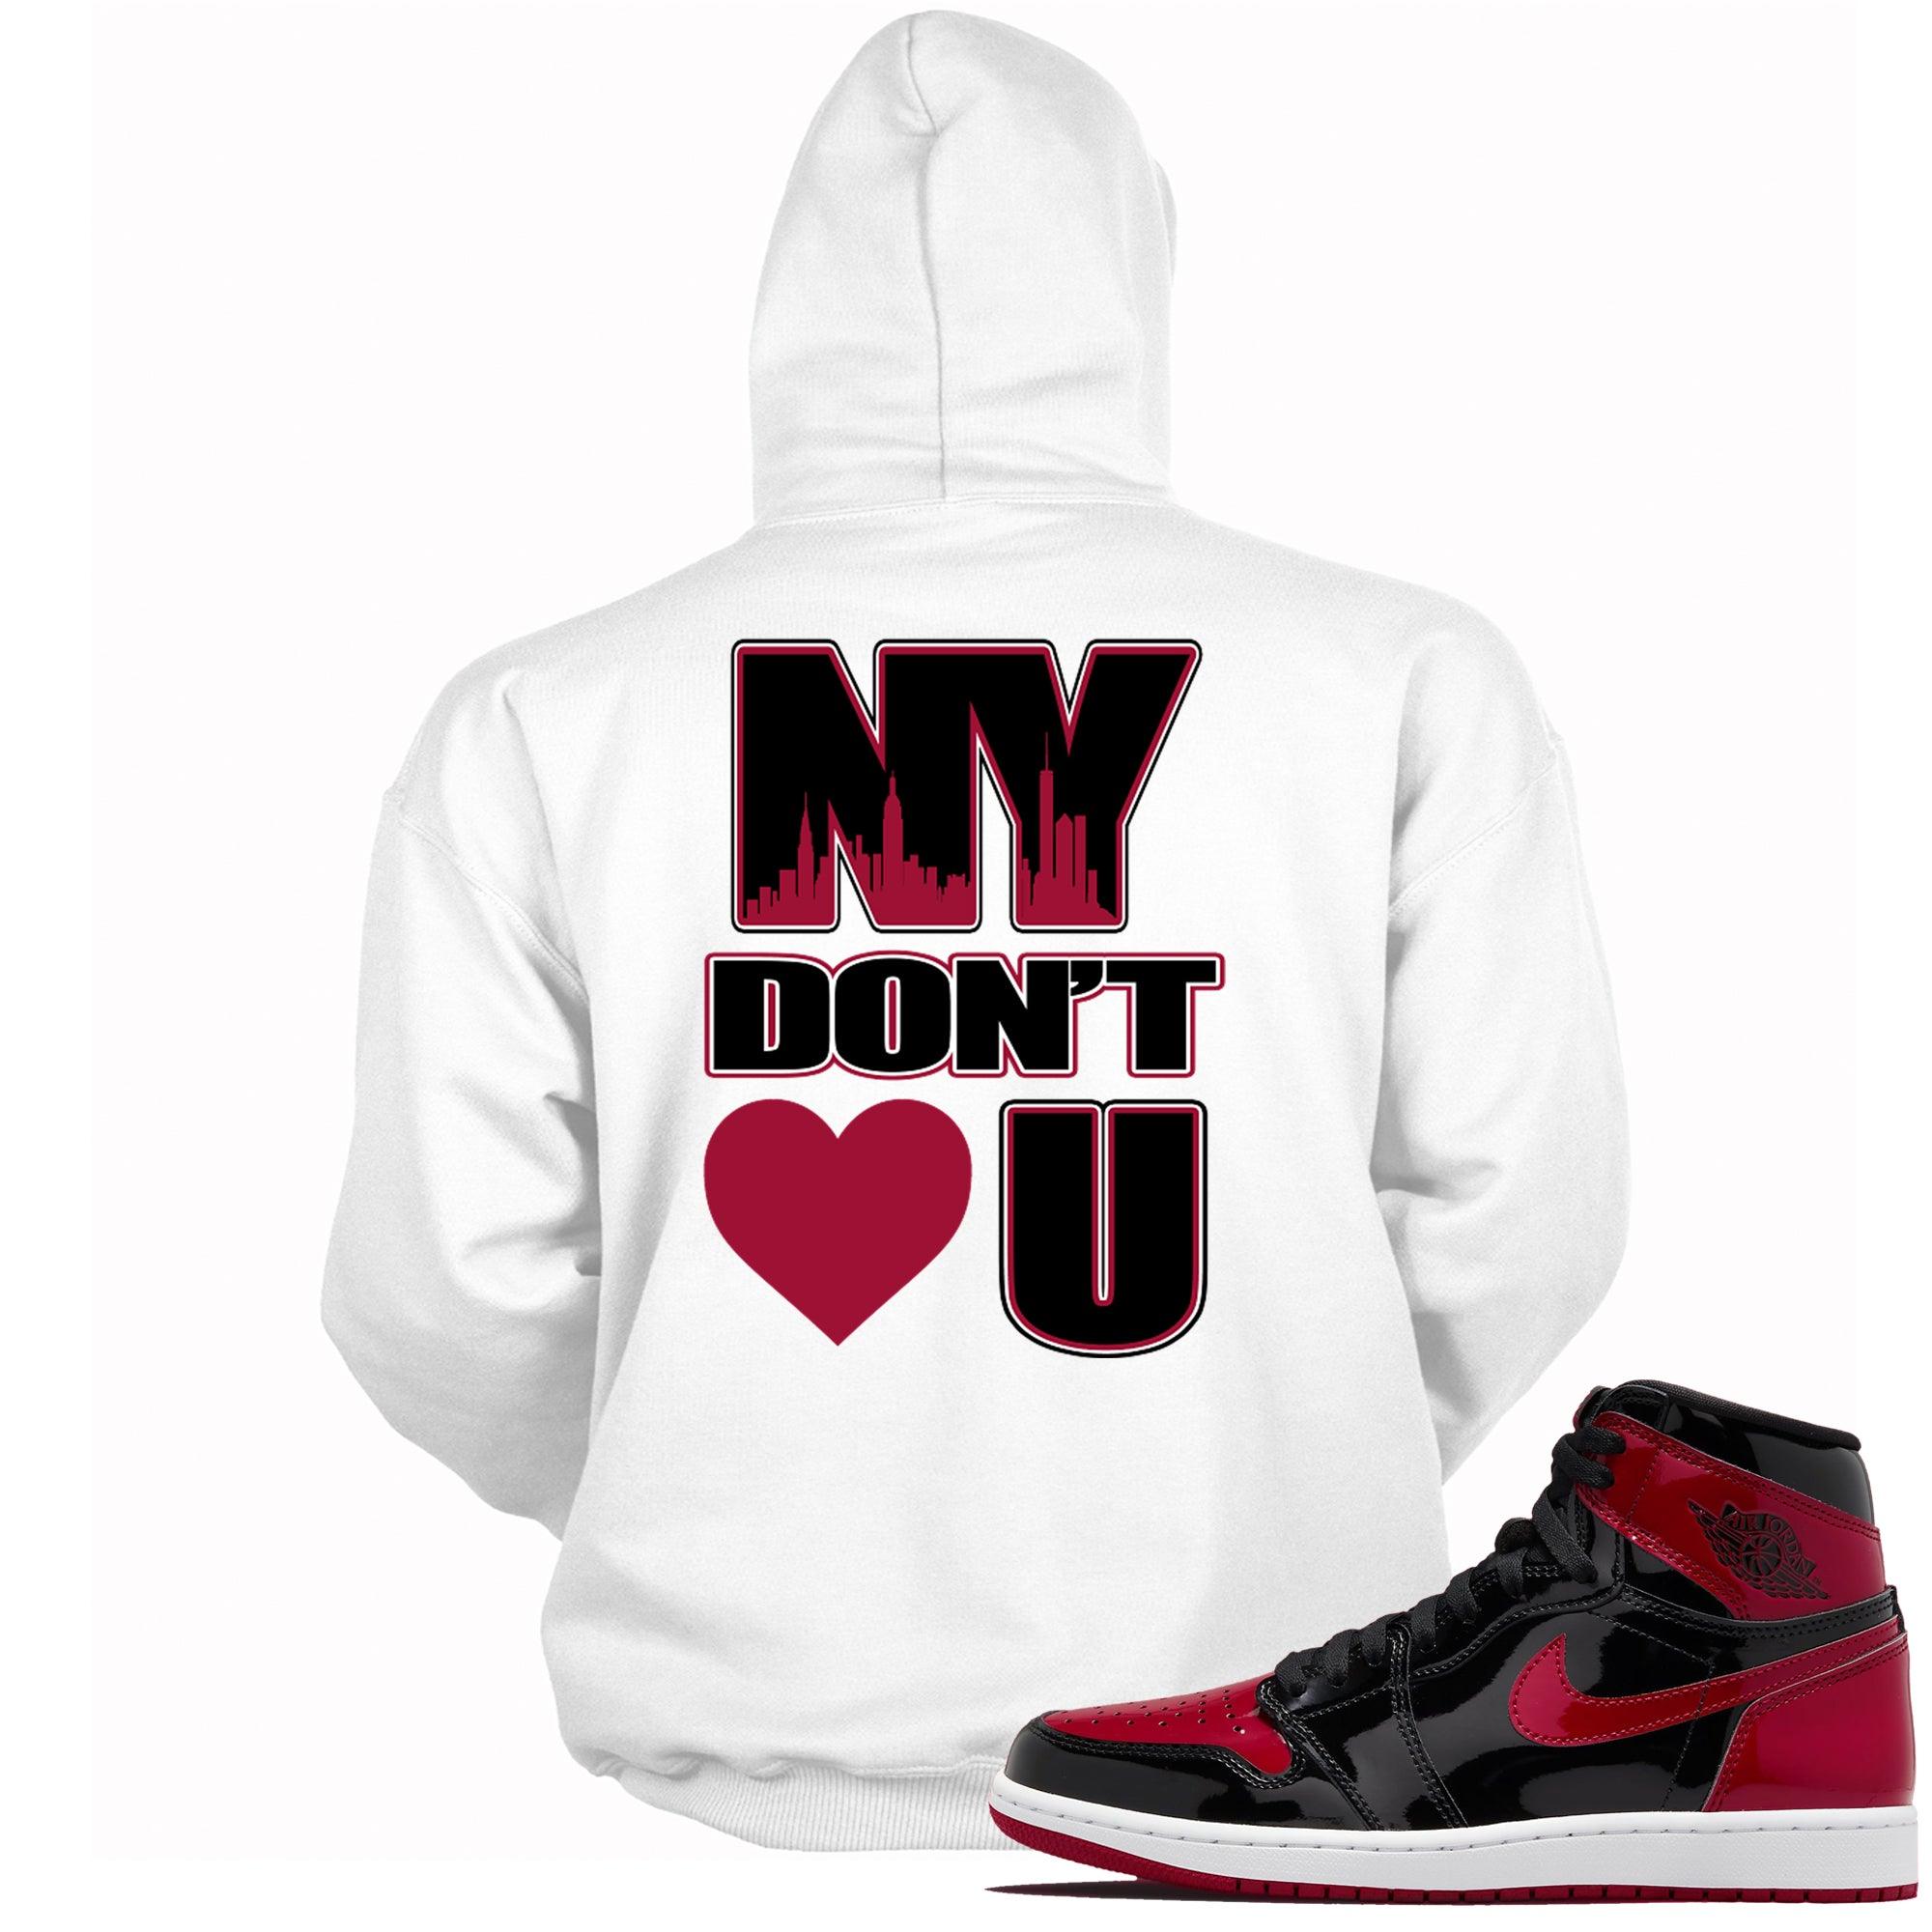 NY Don't Love You Hoodie Jordan 1 Patent Leather Bred photo